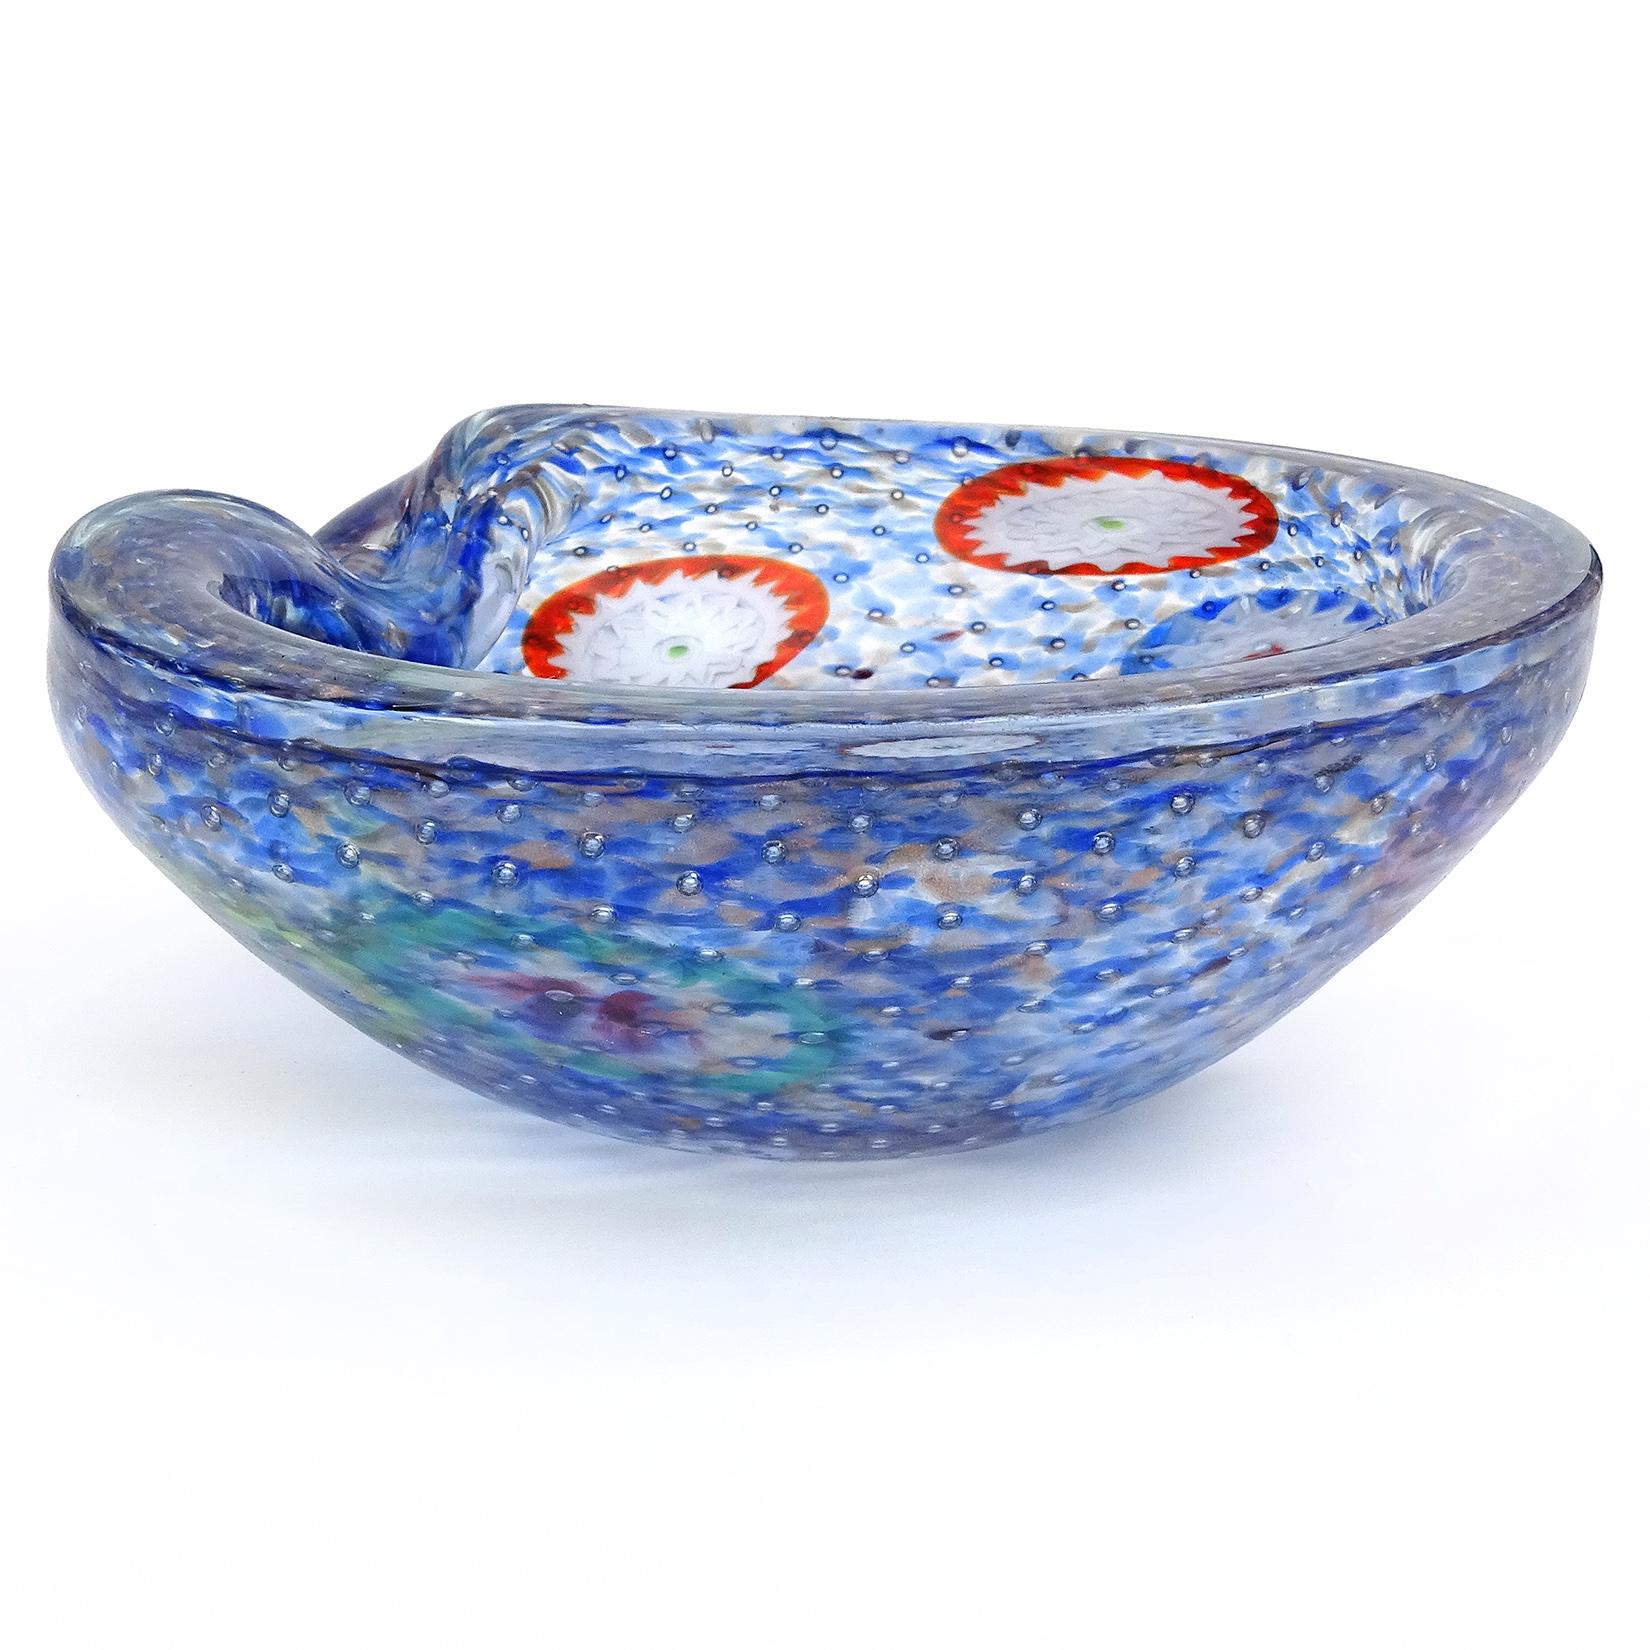 Beautiful vintage Murano hand blown blue, aventurine, bubbles and large millefiori flower murrines Italian art glass bowl. Documented to the Fratelli Toso company. The bowl has 11 large flower canes throughout it, and the color is made with little